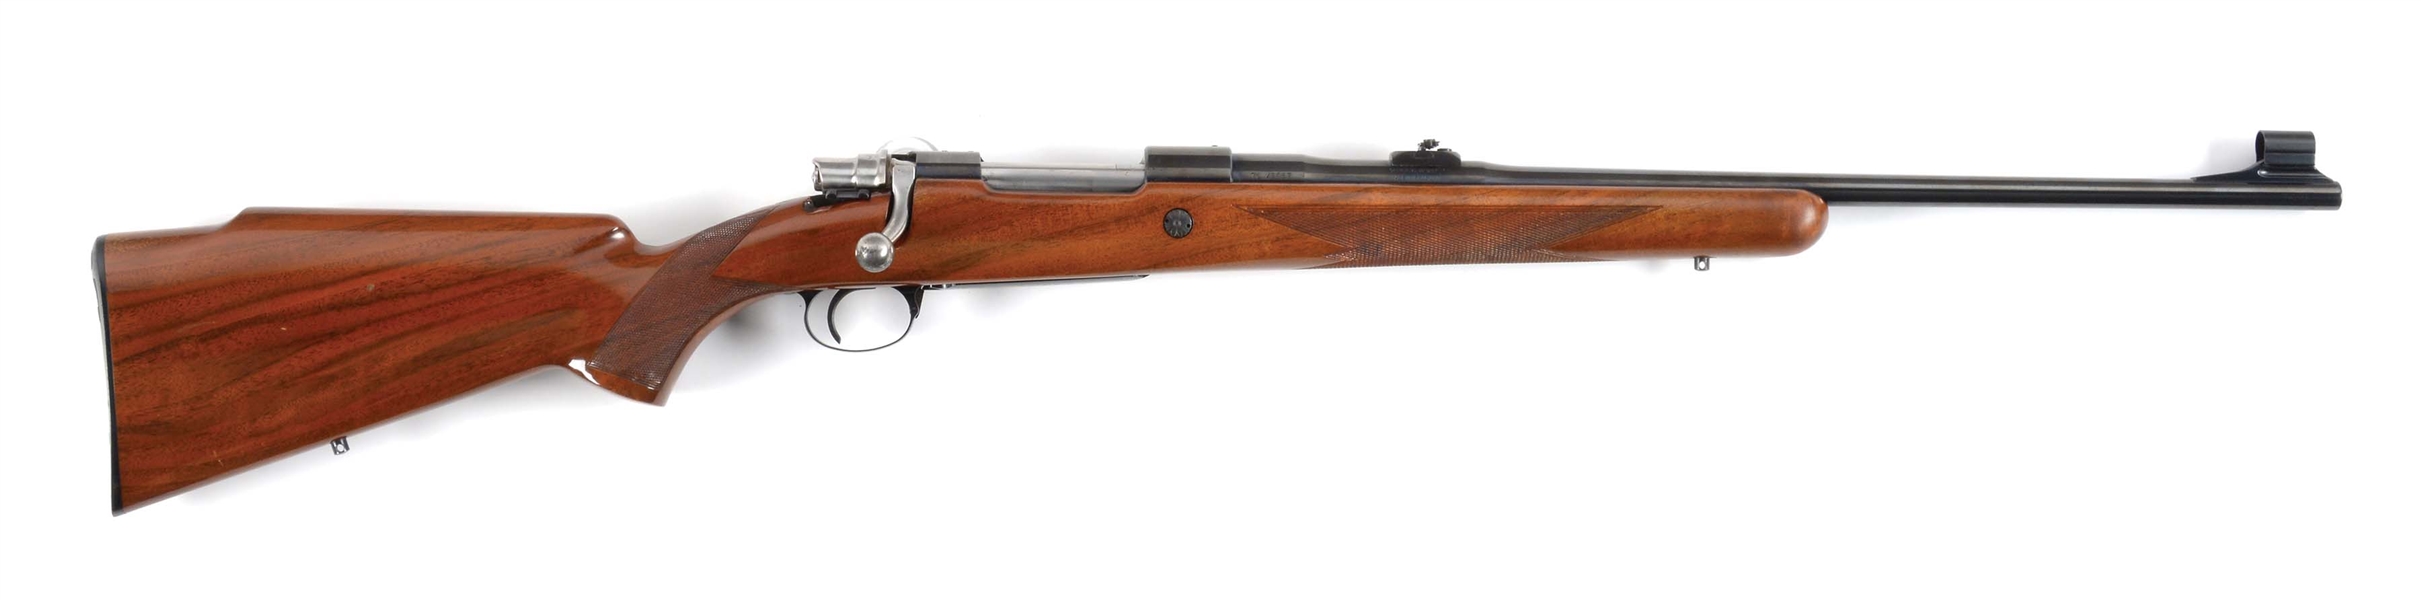 (C) BROWNING HIGH POWER MEDALLION .30-06 BOLT ACTION RIFLE WITH SCOPE AND OTHER ACCESSORIES.